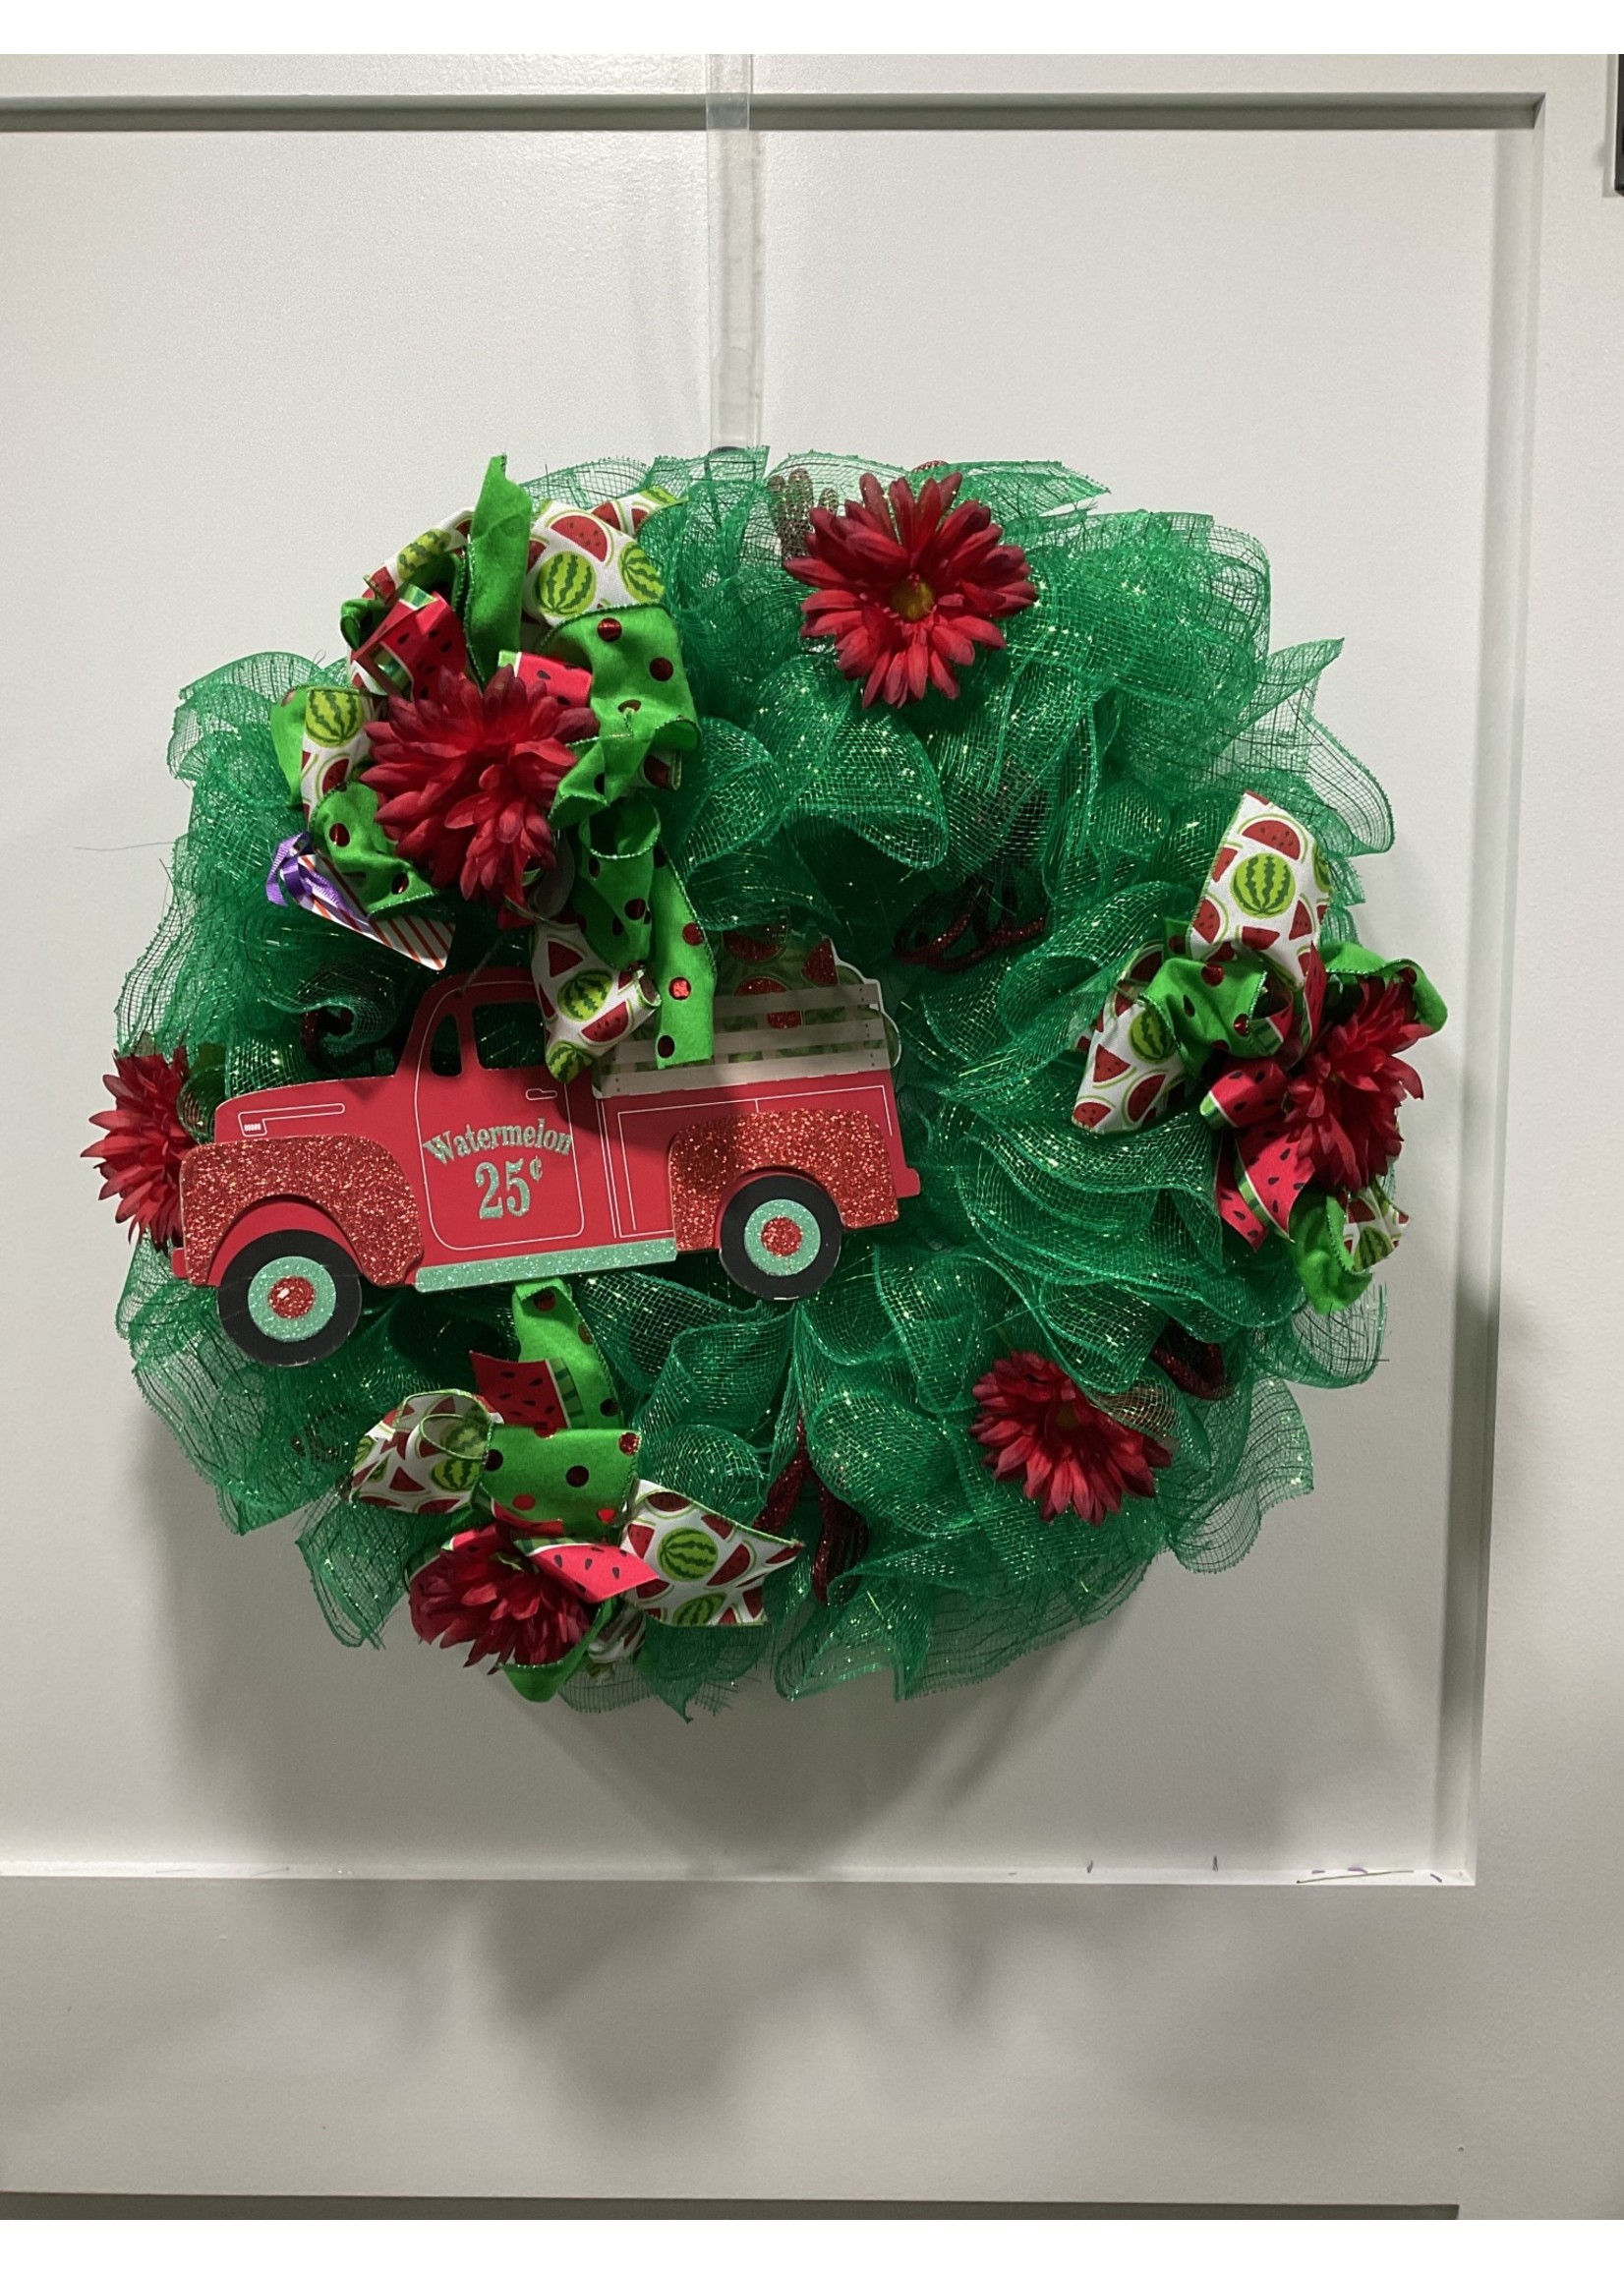 My New Favorite Thing Wreath Mesh 26 in-Green "Watermelons 25" w/Red Flowers and Watermelon Ribbon